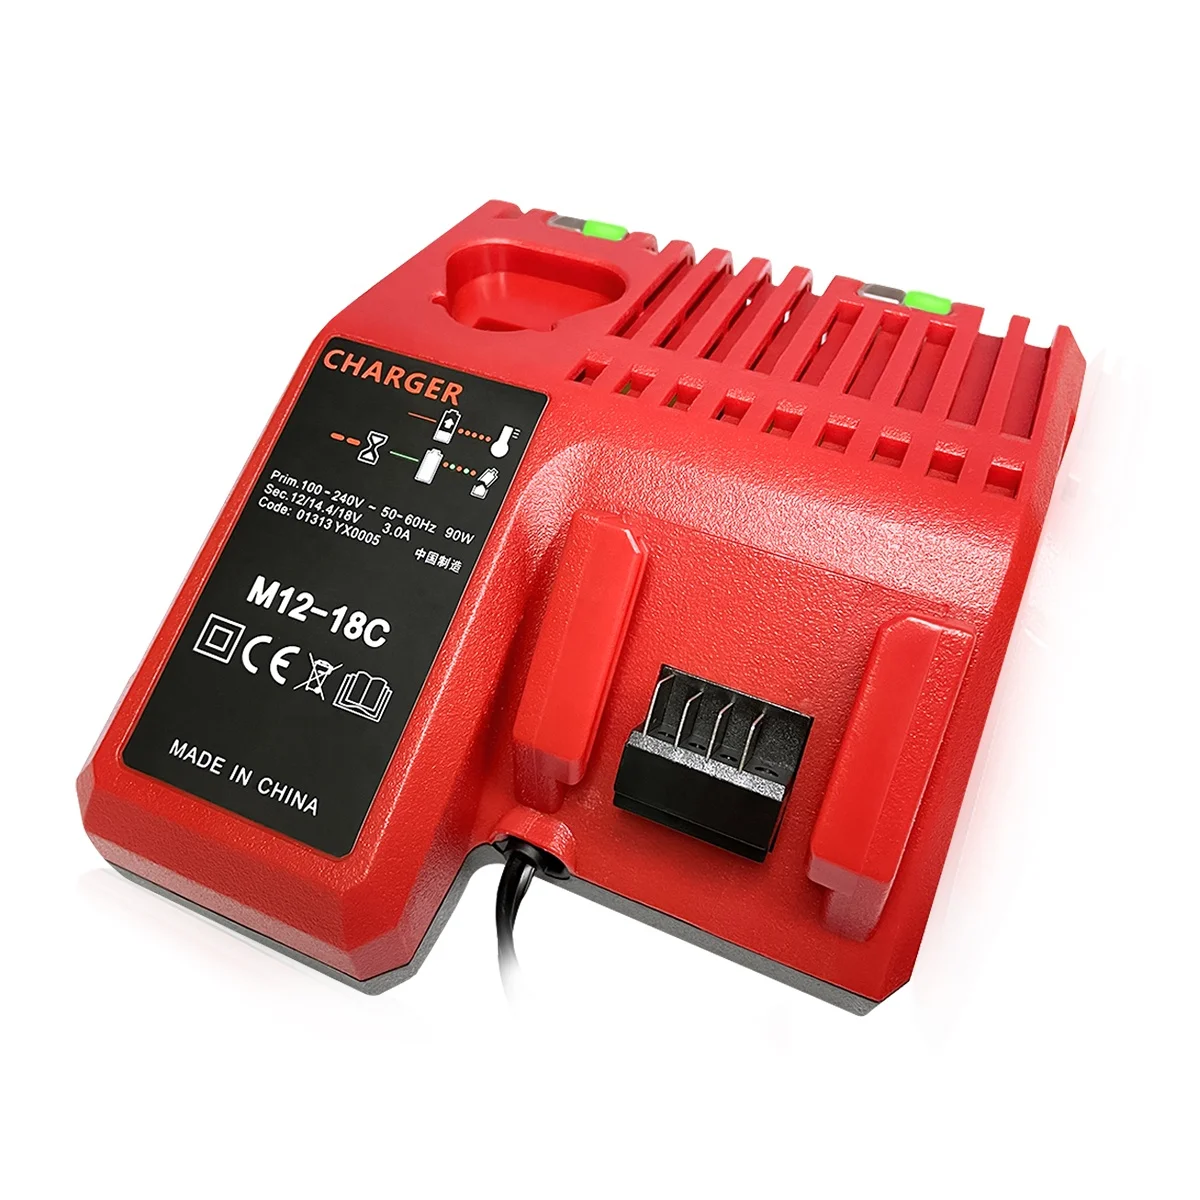 

M12-18C 12V-18V Rapid Charger Replacement for 18v Milwaukee Battery M18 M12 48-59-1812 48-11-1850 48-11-1840 48-11-1815 US Plug, Red+black